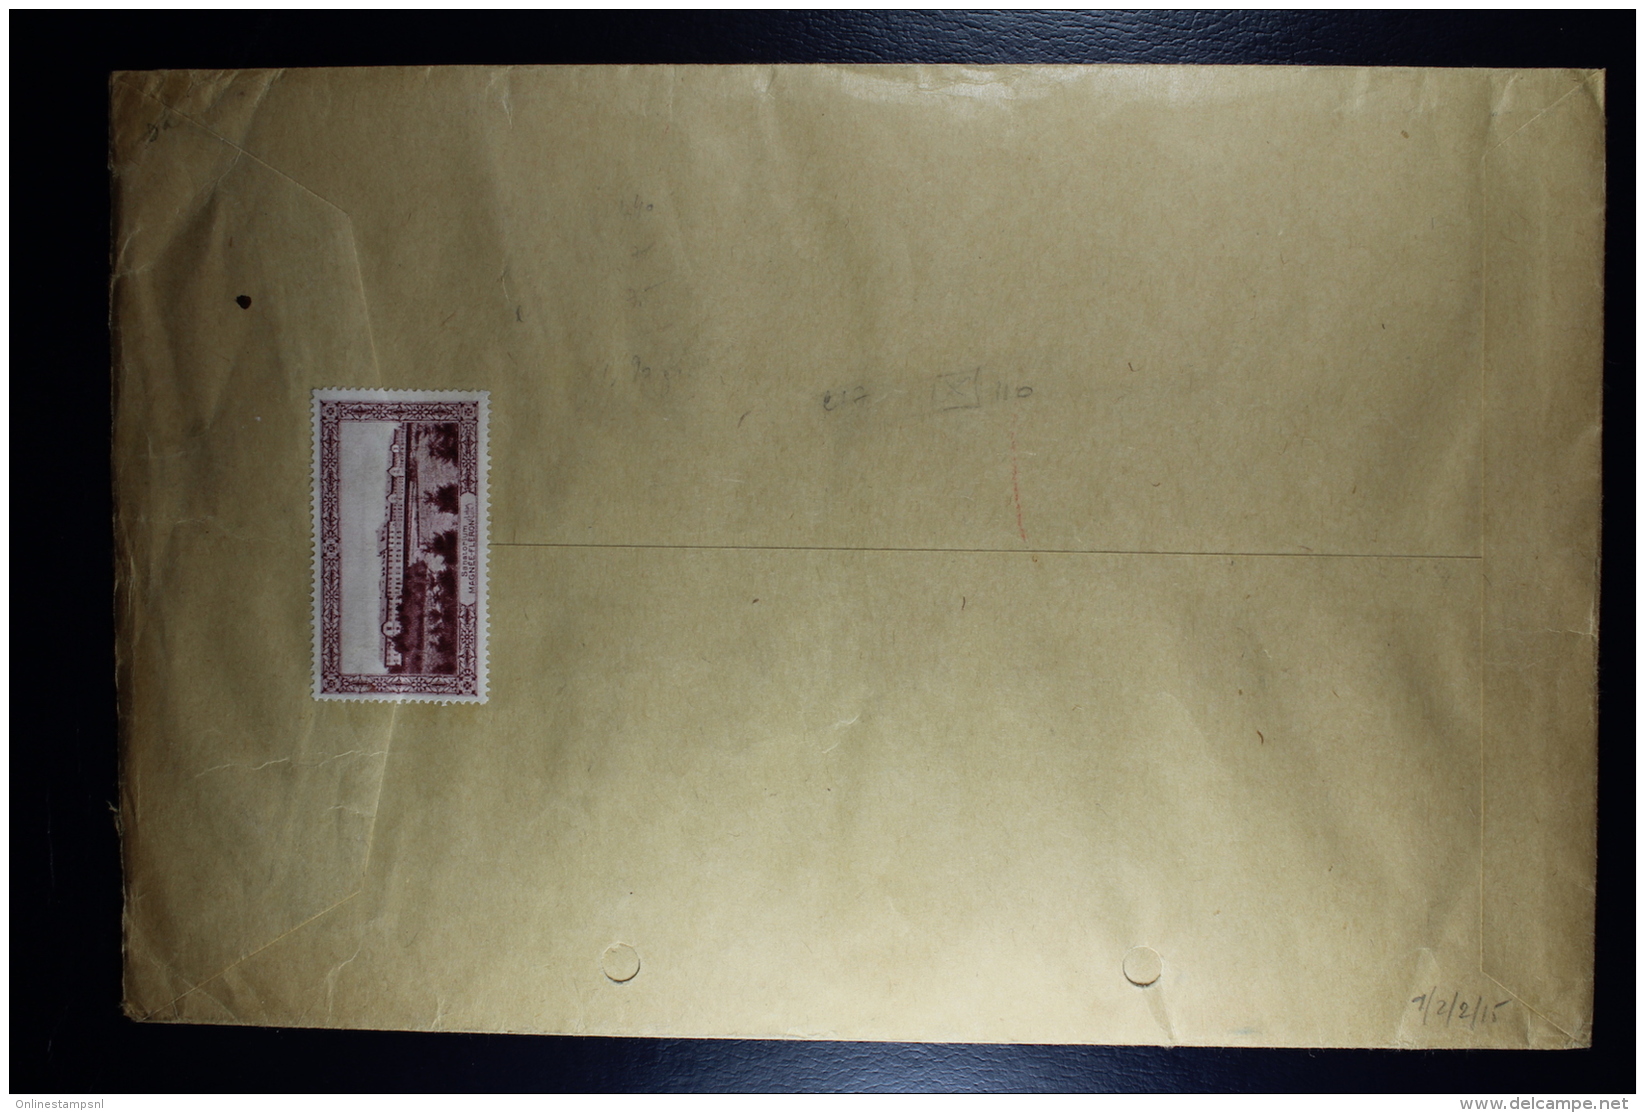 Belgium: Express And Registered Cover TERNATH To Otterbeek   OPB  218  1935 - Storia Postale